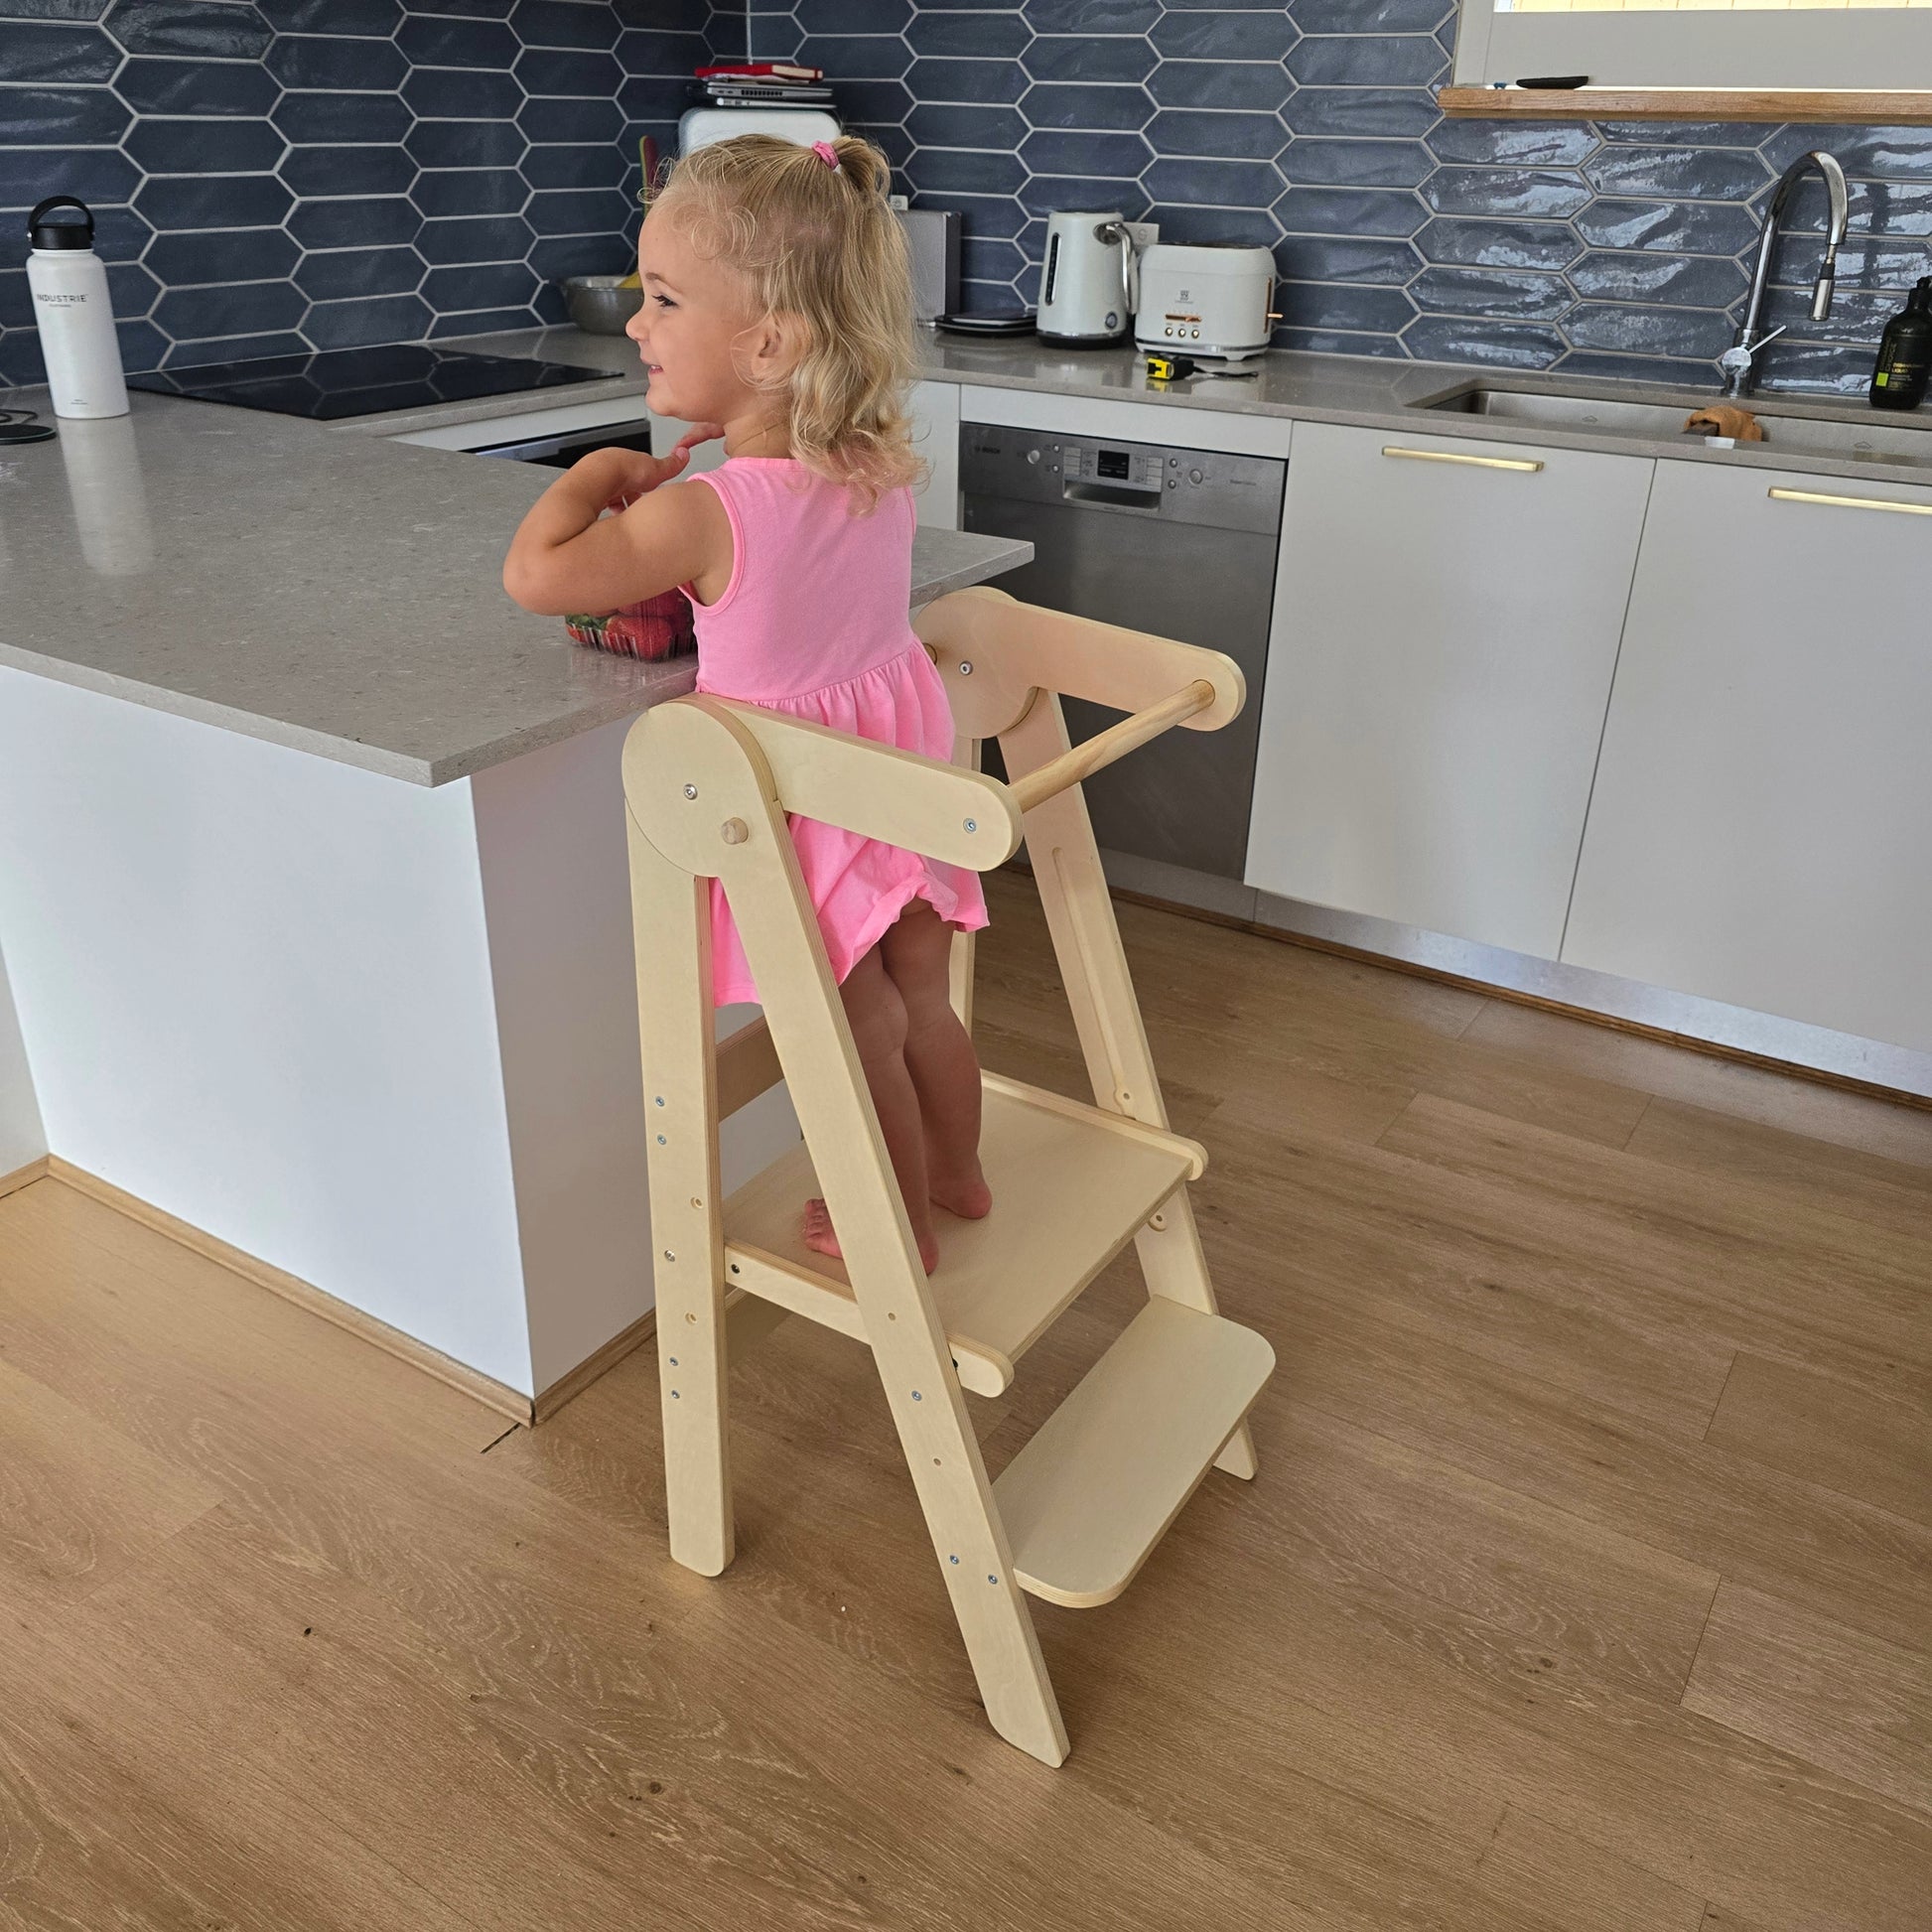 Toddler on the Four Little Monkeys Natural Adjustable Foldable Learning Tower reaching kitchen countertop, enhancing engagement during meal prep.